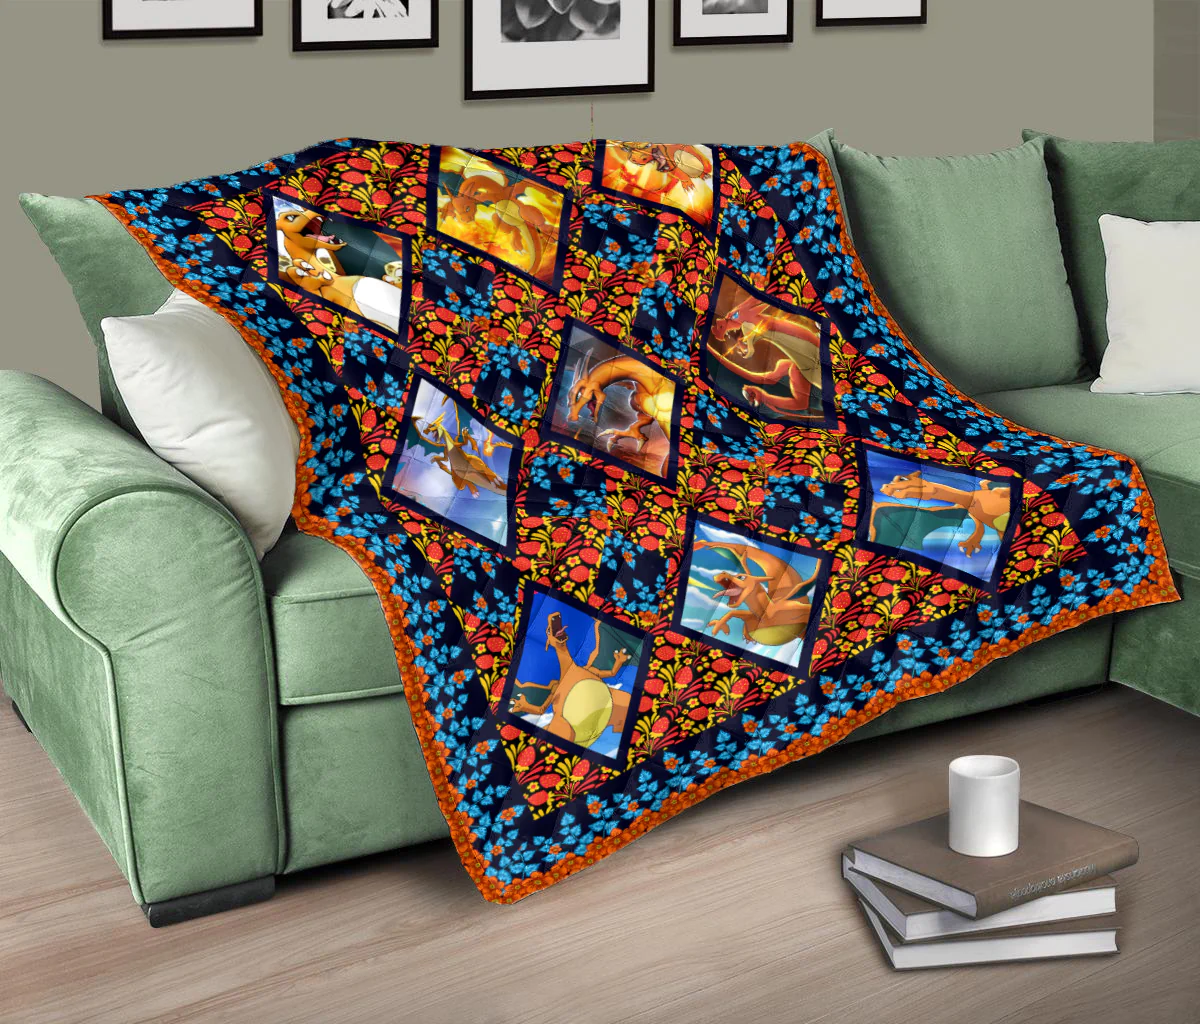 Charizard New Quilt